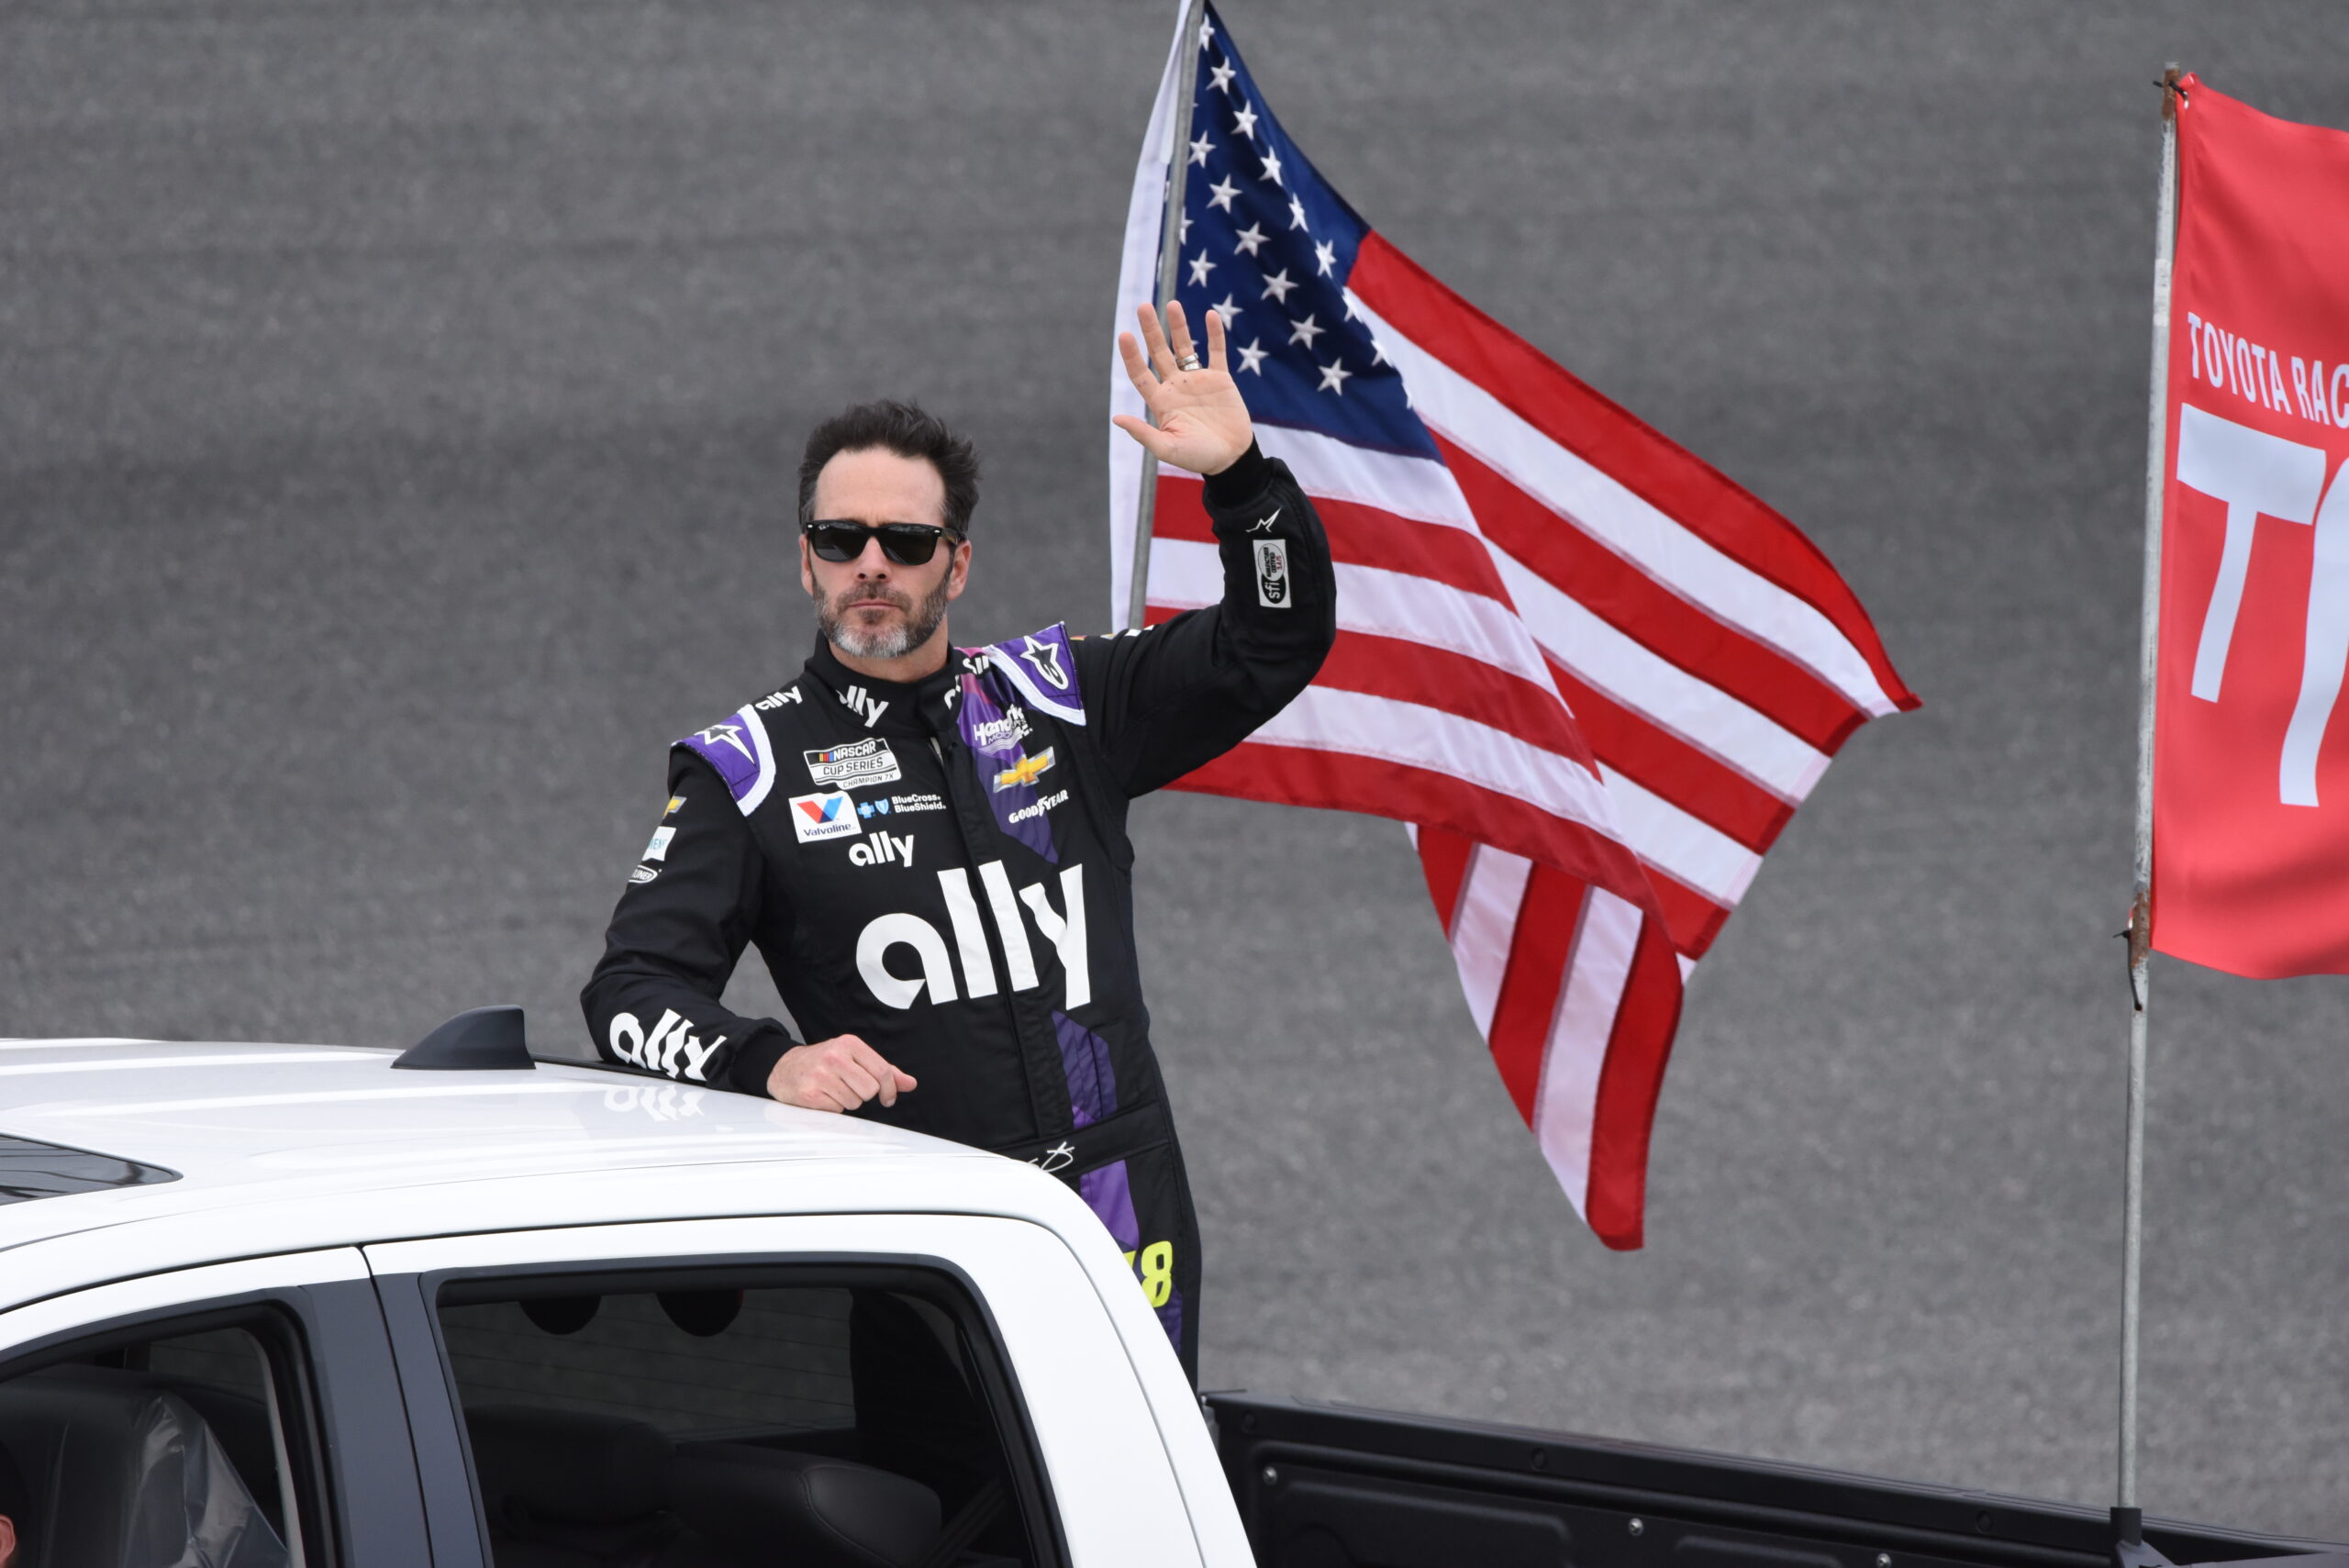 Undoubtedly, Jimmie Johnson remains focused on chasing NASCAR history. (Photo Credit: Luis Torres)